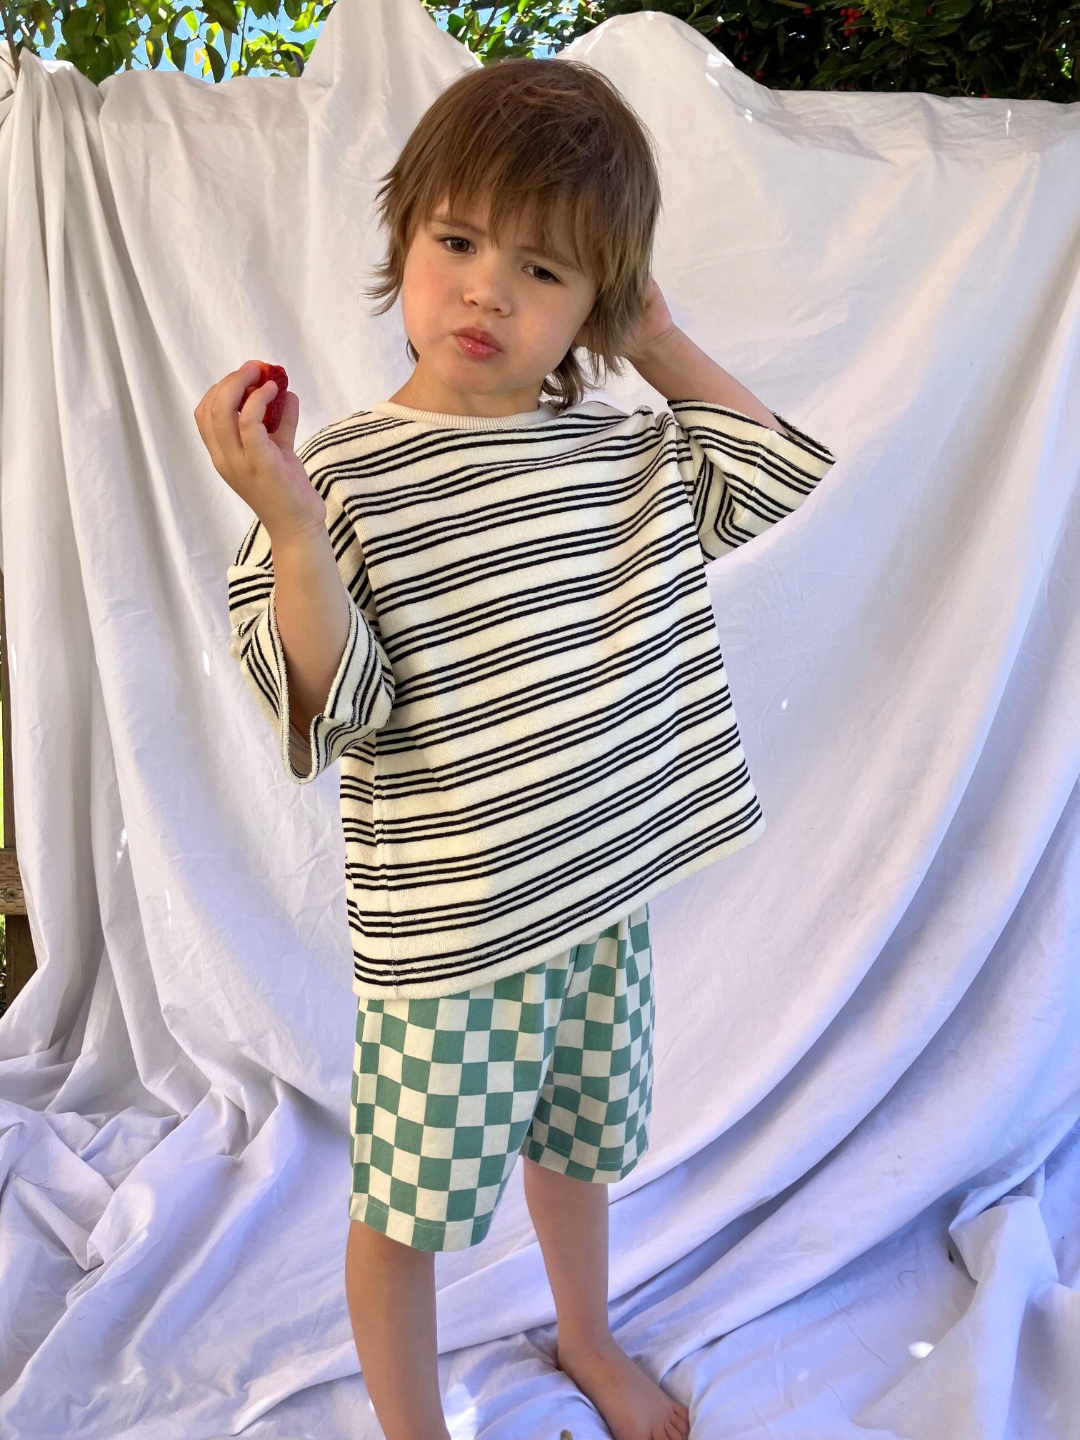 Teal | A child wearing the kids Frankie Short in Teal & Ivory check, paired with a boxy cream tshirt with fine black stripes. He is eating a strawberry and standing on a white cloth backdrop, with trees in the background.